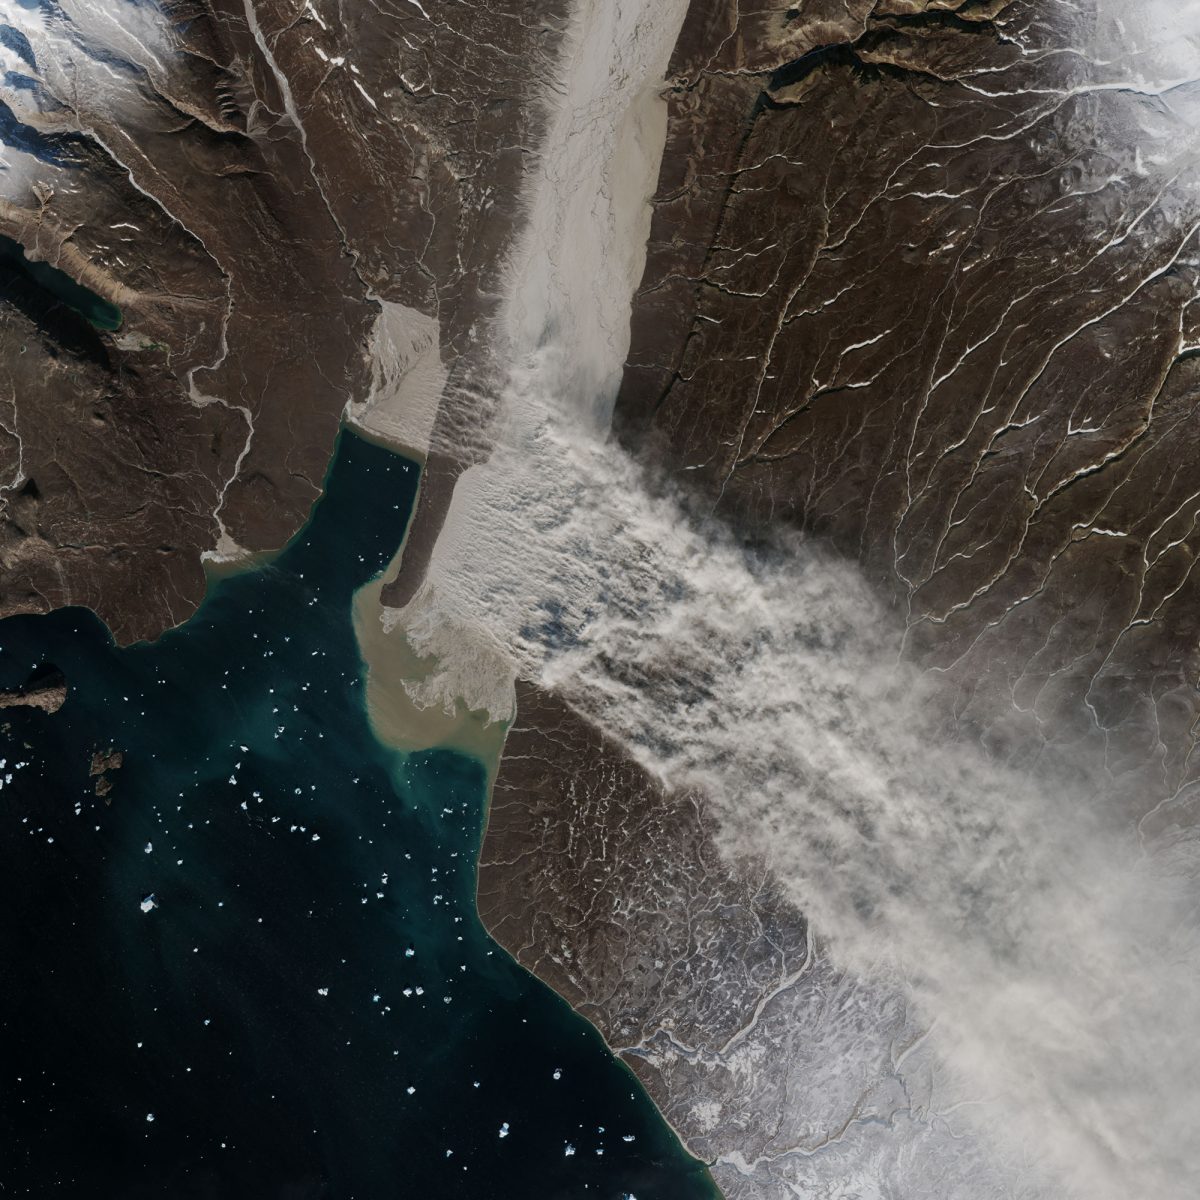 A dust storm in Greenland? Beautiful satellite images show one far north of the Arctic Circle